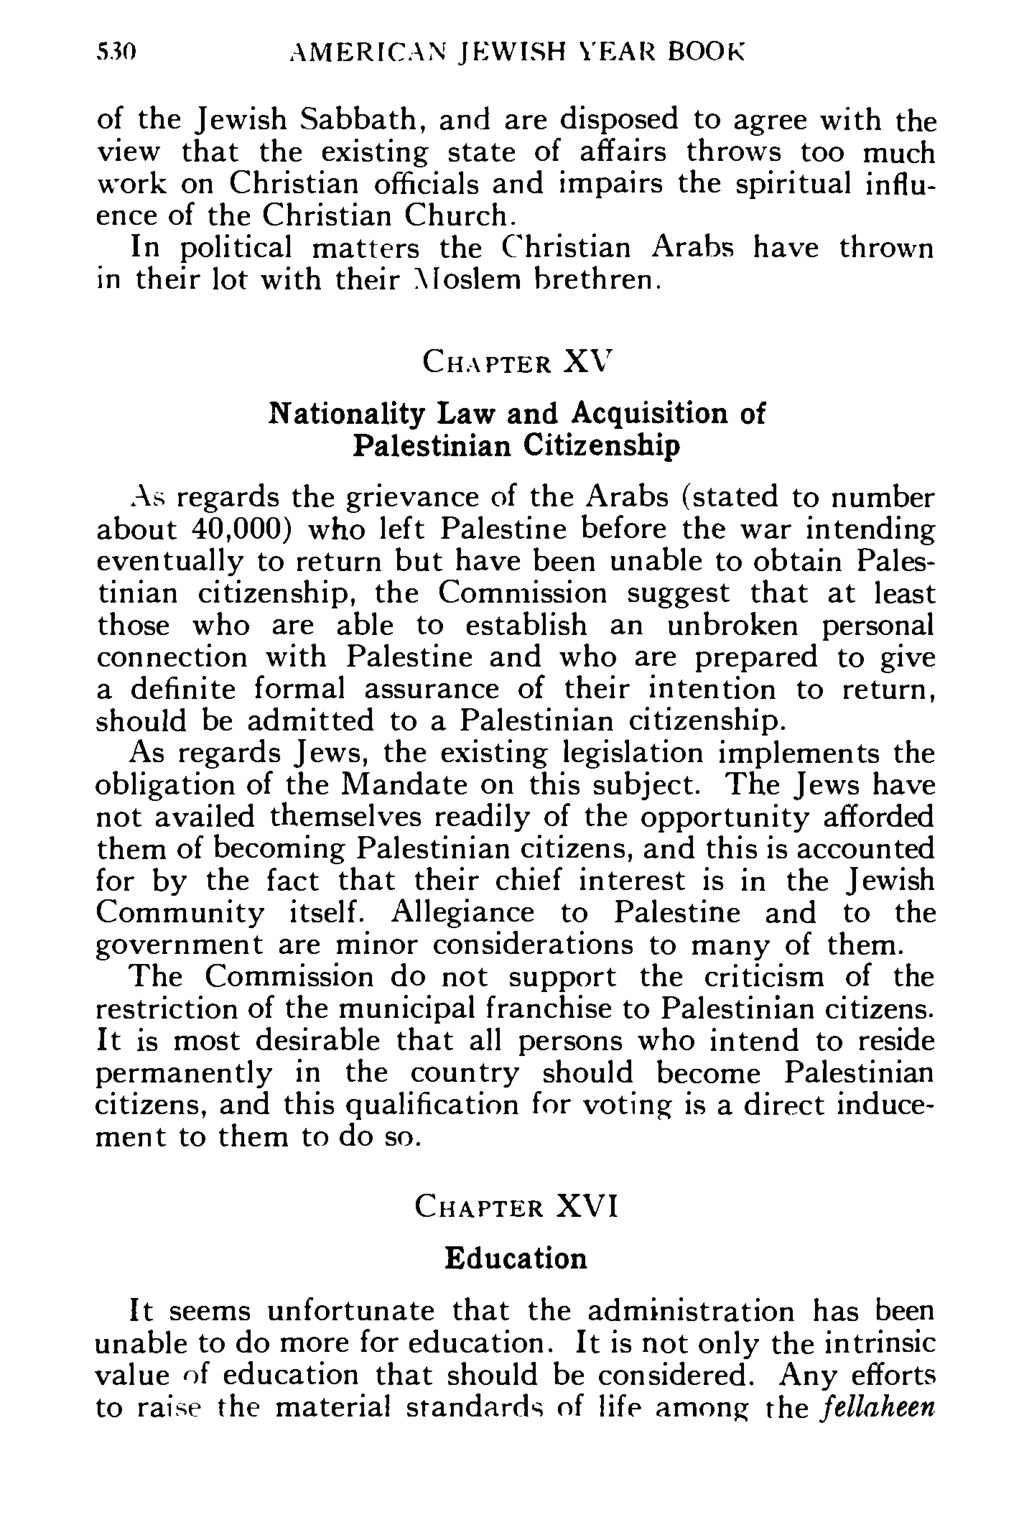 530 AMERICAN JEWISH YEAR BOOK of the Jewish Sabbath, and are disposed to agree with the view that the existing state of affairs throws too much work on Christian officials and impairs the spiritual